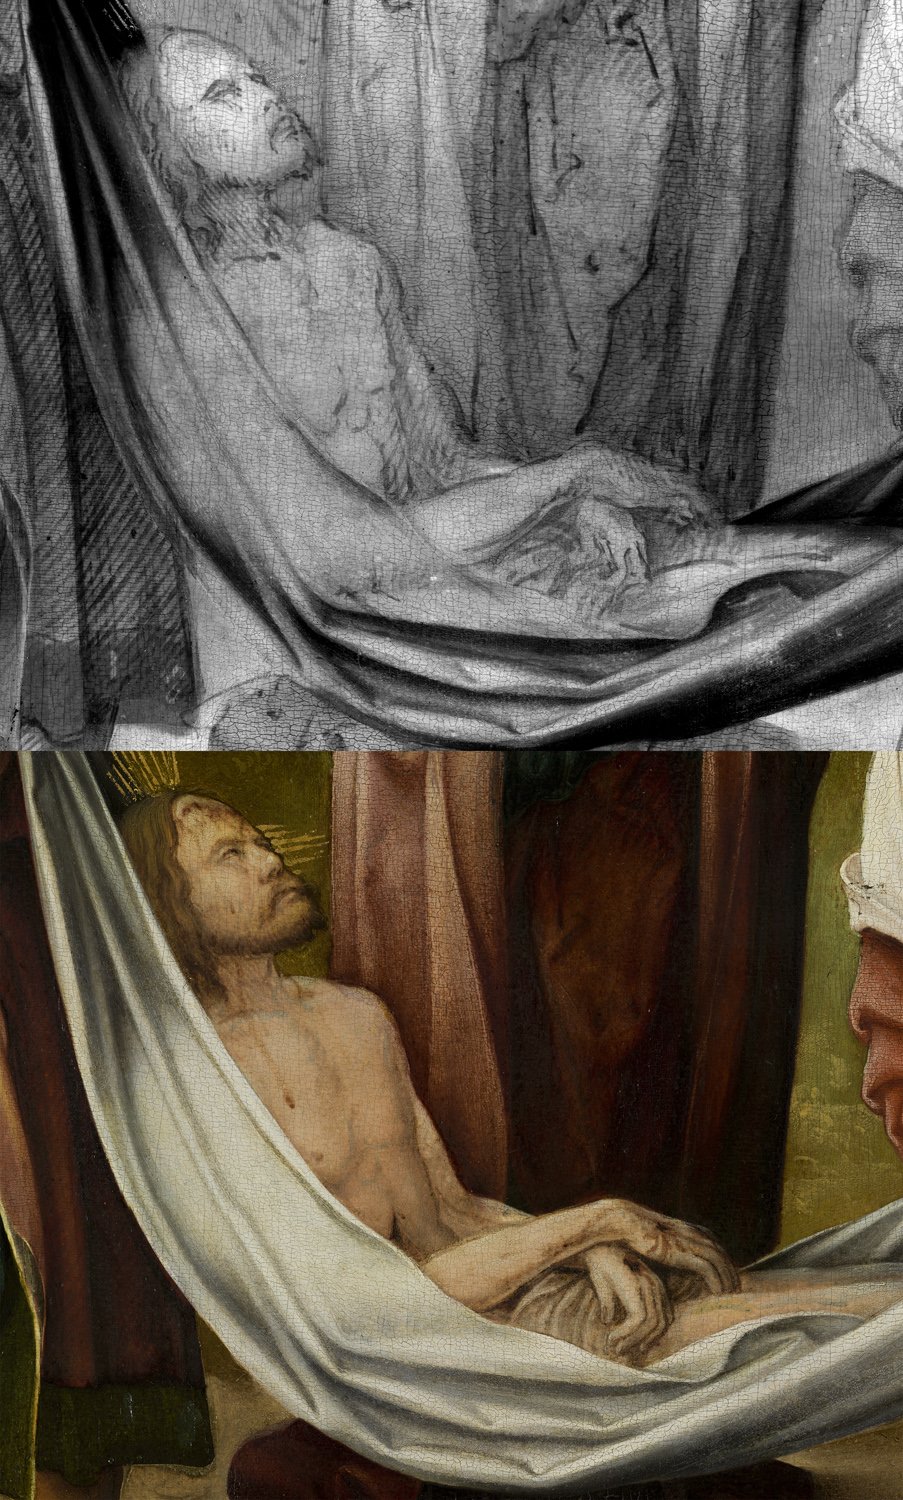 Comparative detail of infrared reflectography and visible image of Burgkmair's painting "Christ's Body Carried to the Tomb"